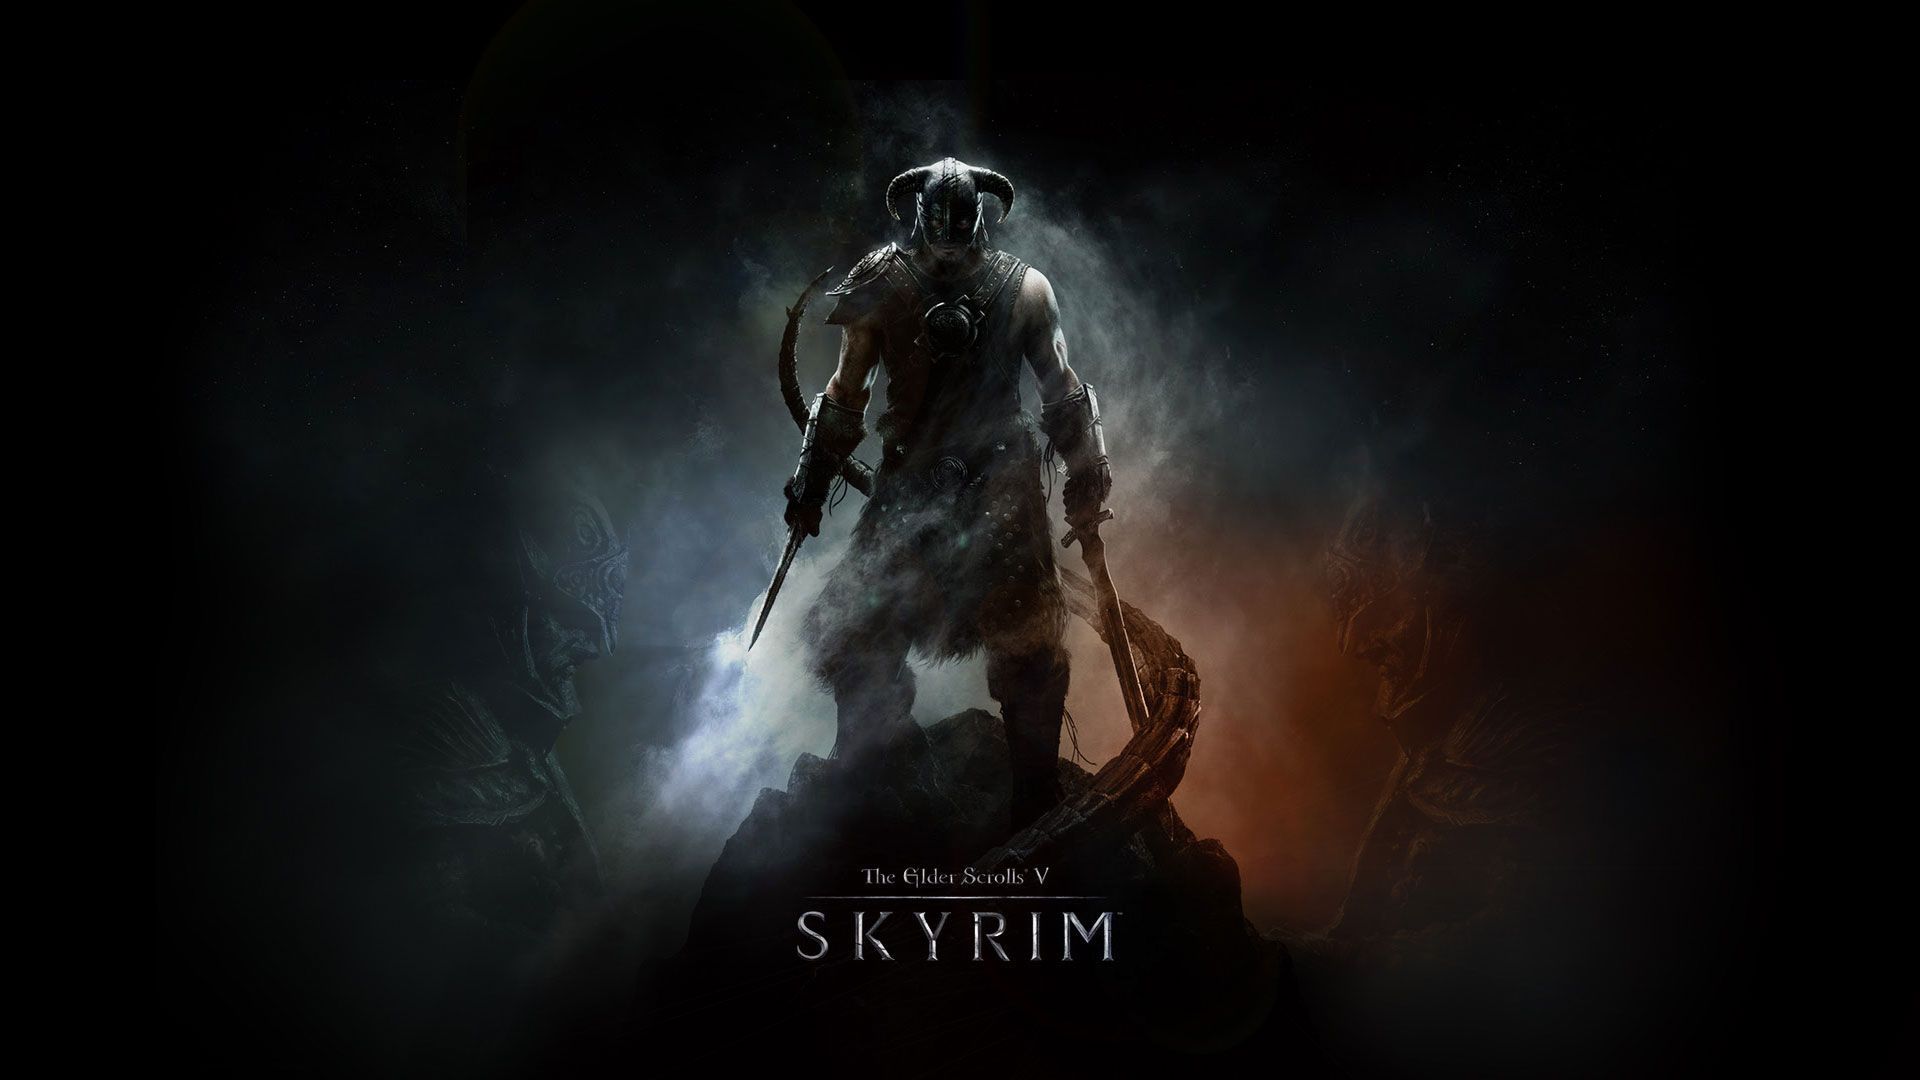 The Elder Scrolls V: Skyrim HD Wallpapers | I Have A PC